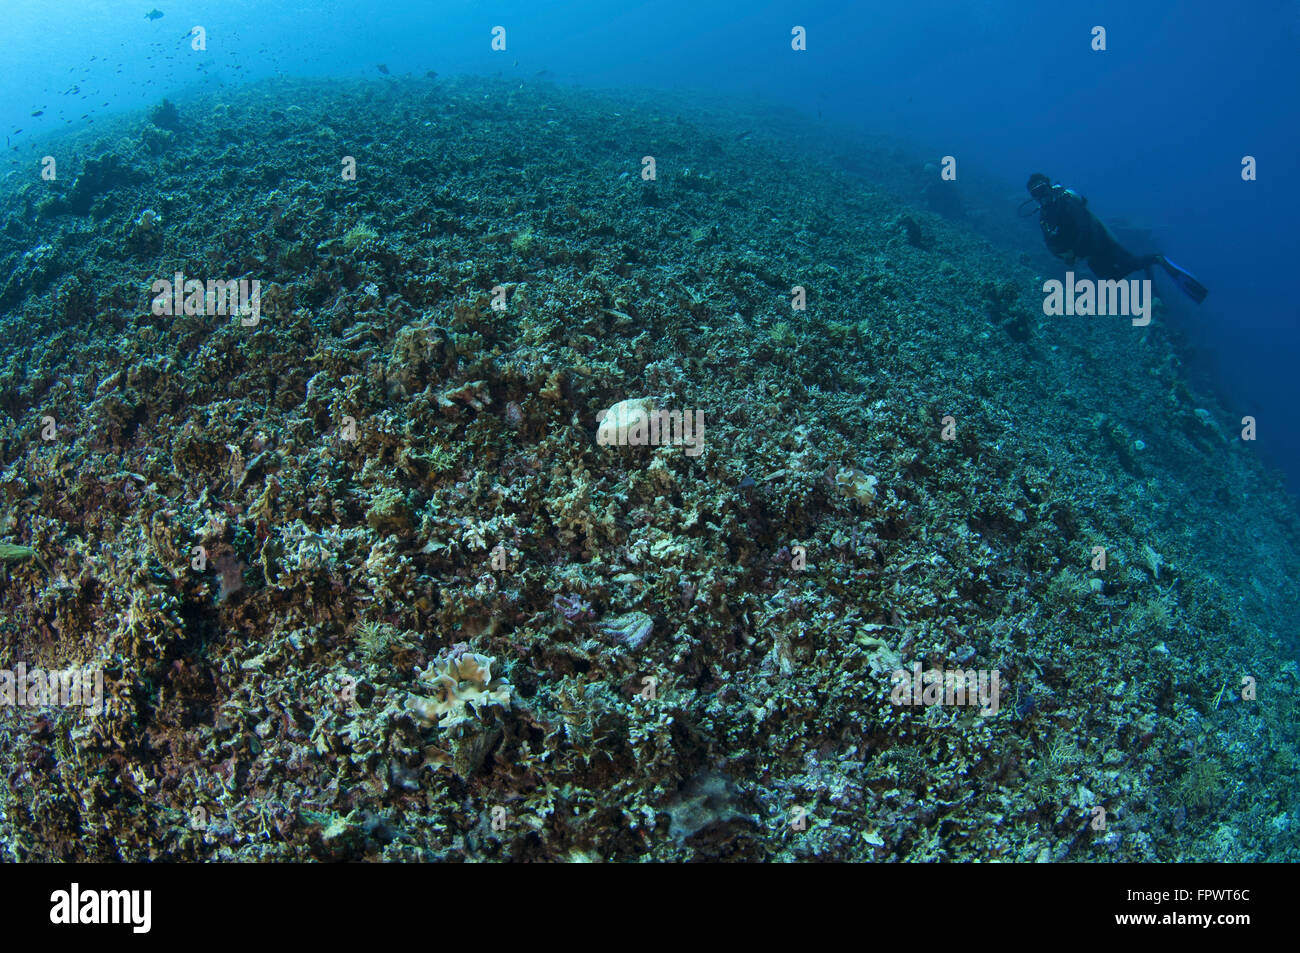 The effects of reef bombing by dynamite fishermen - all coral destroyed, all fish gone, Komodo National Park, Indonesia. Stock Photo